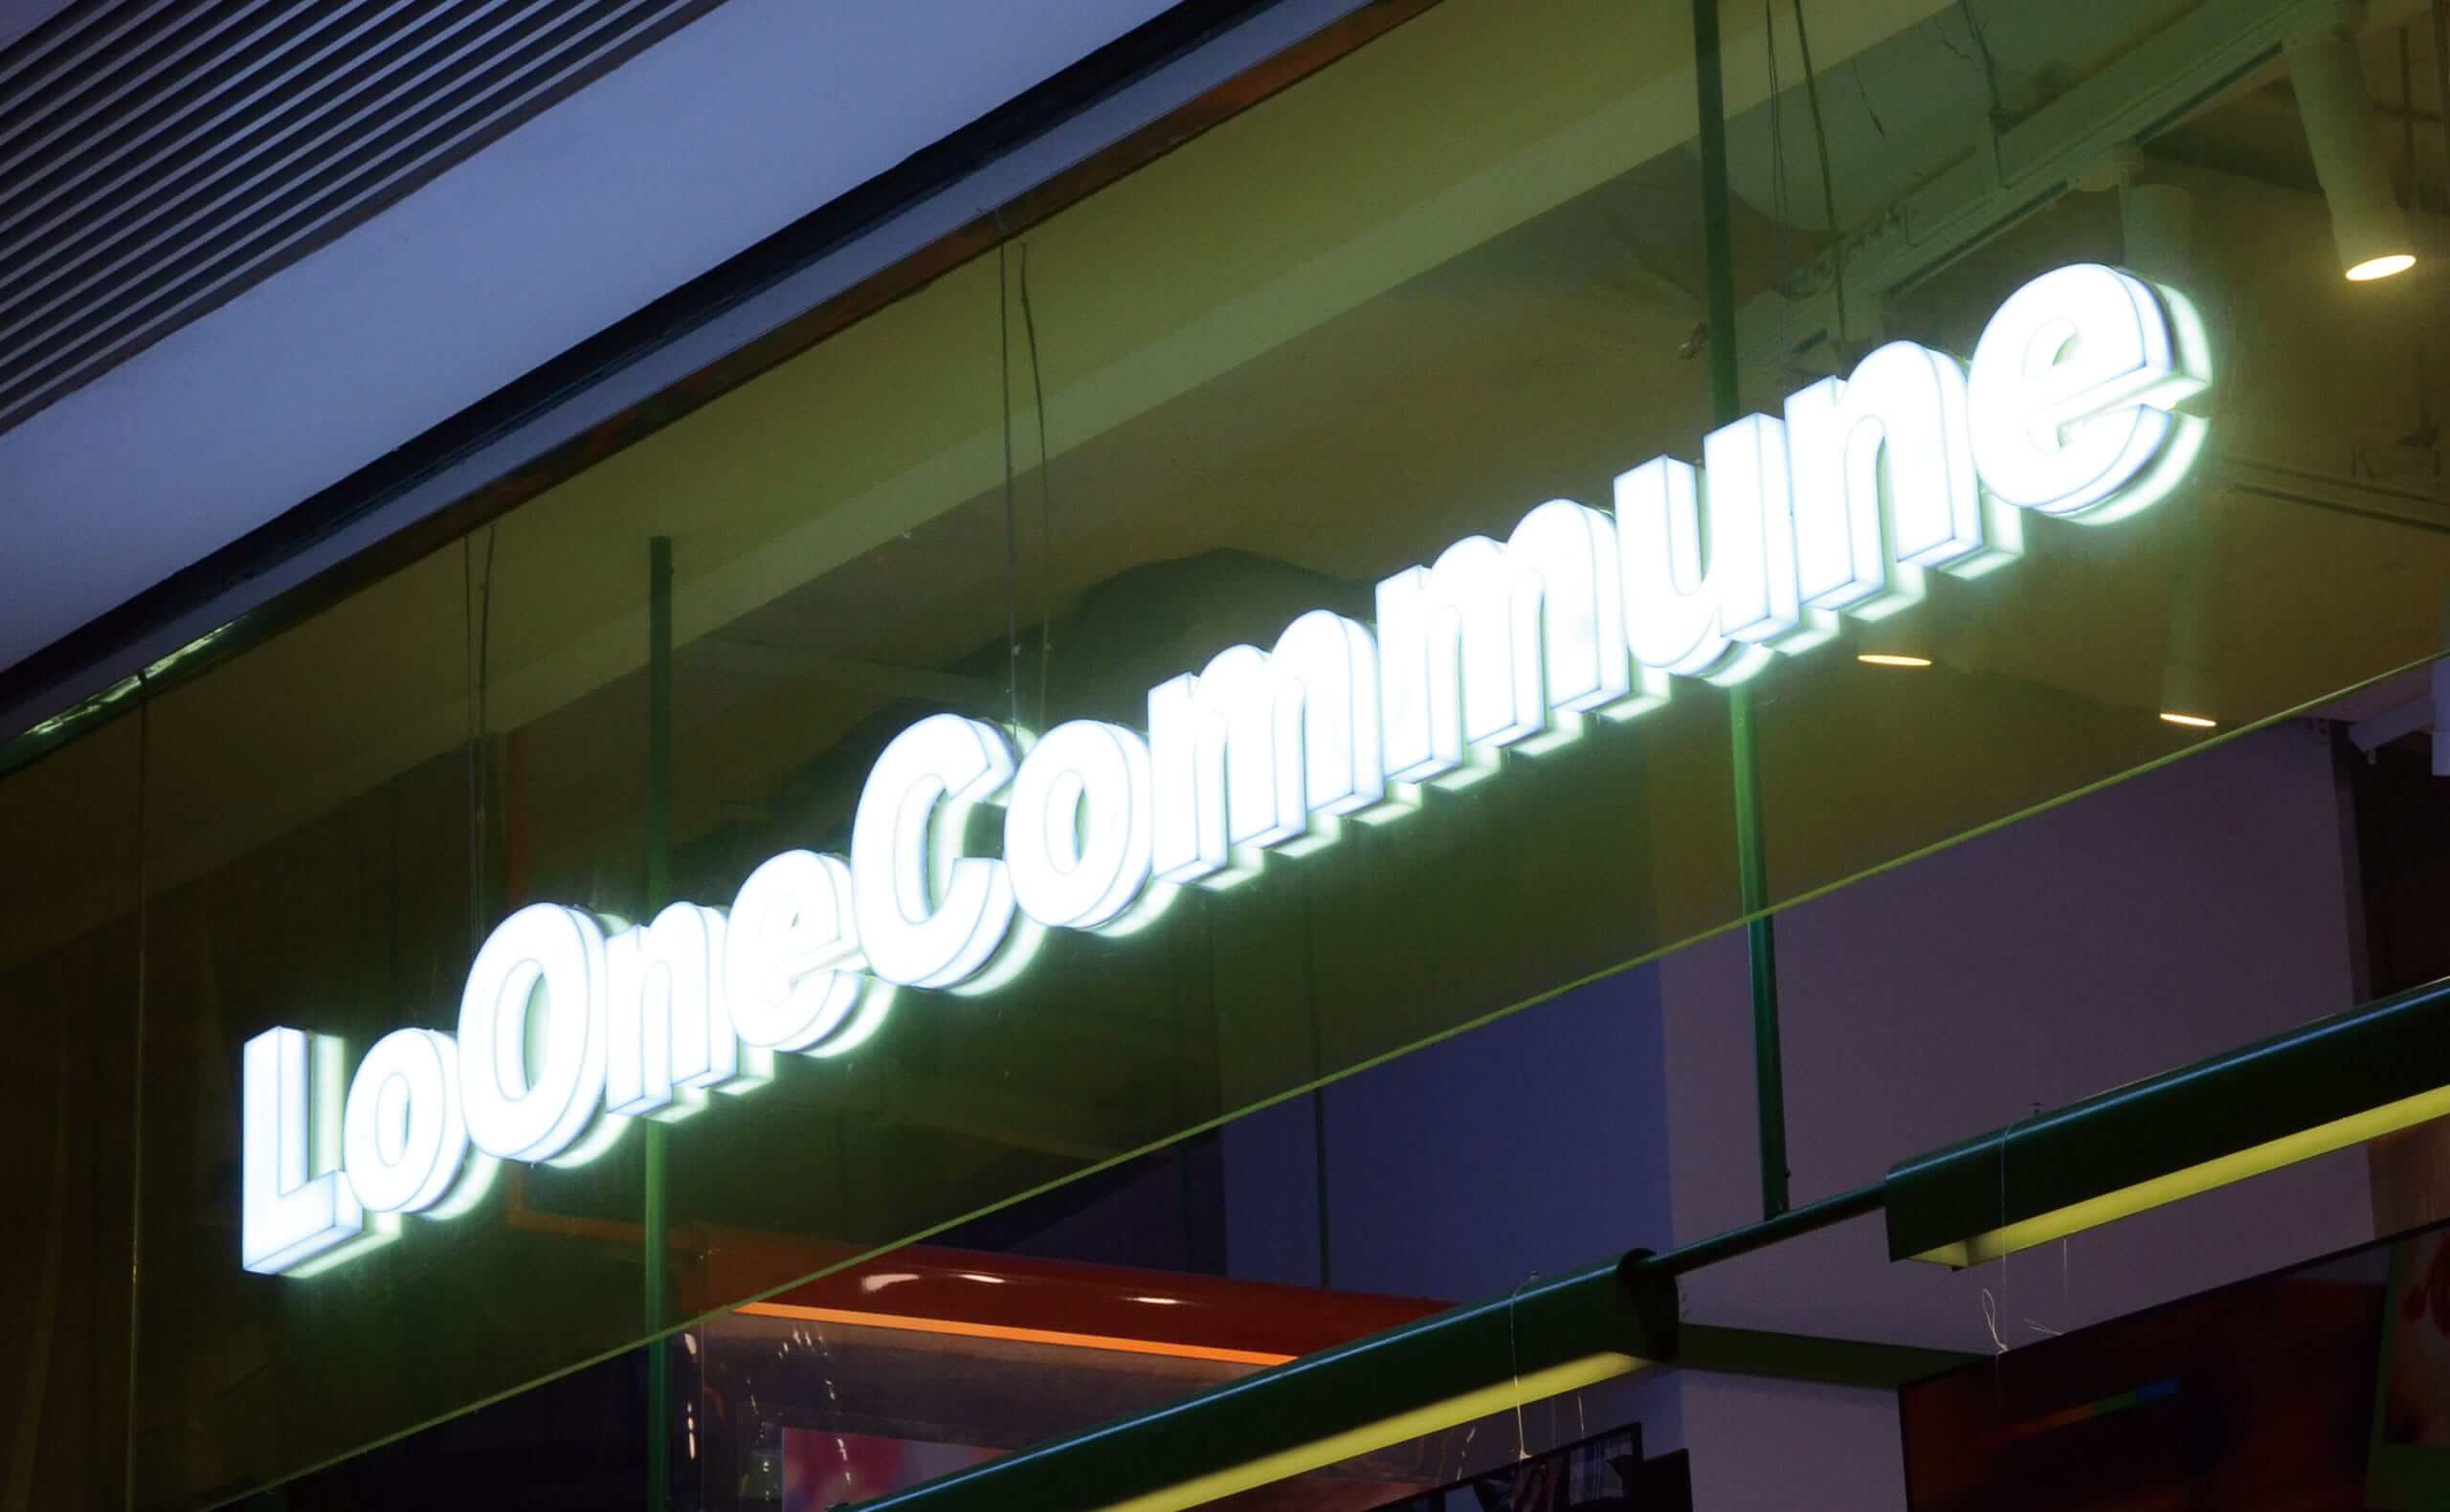 Front and Side Lit Channel Letters for Lo One Commune